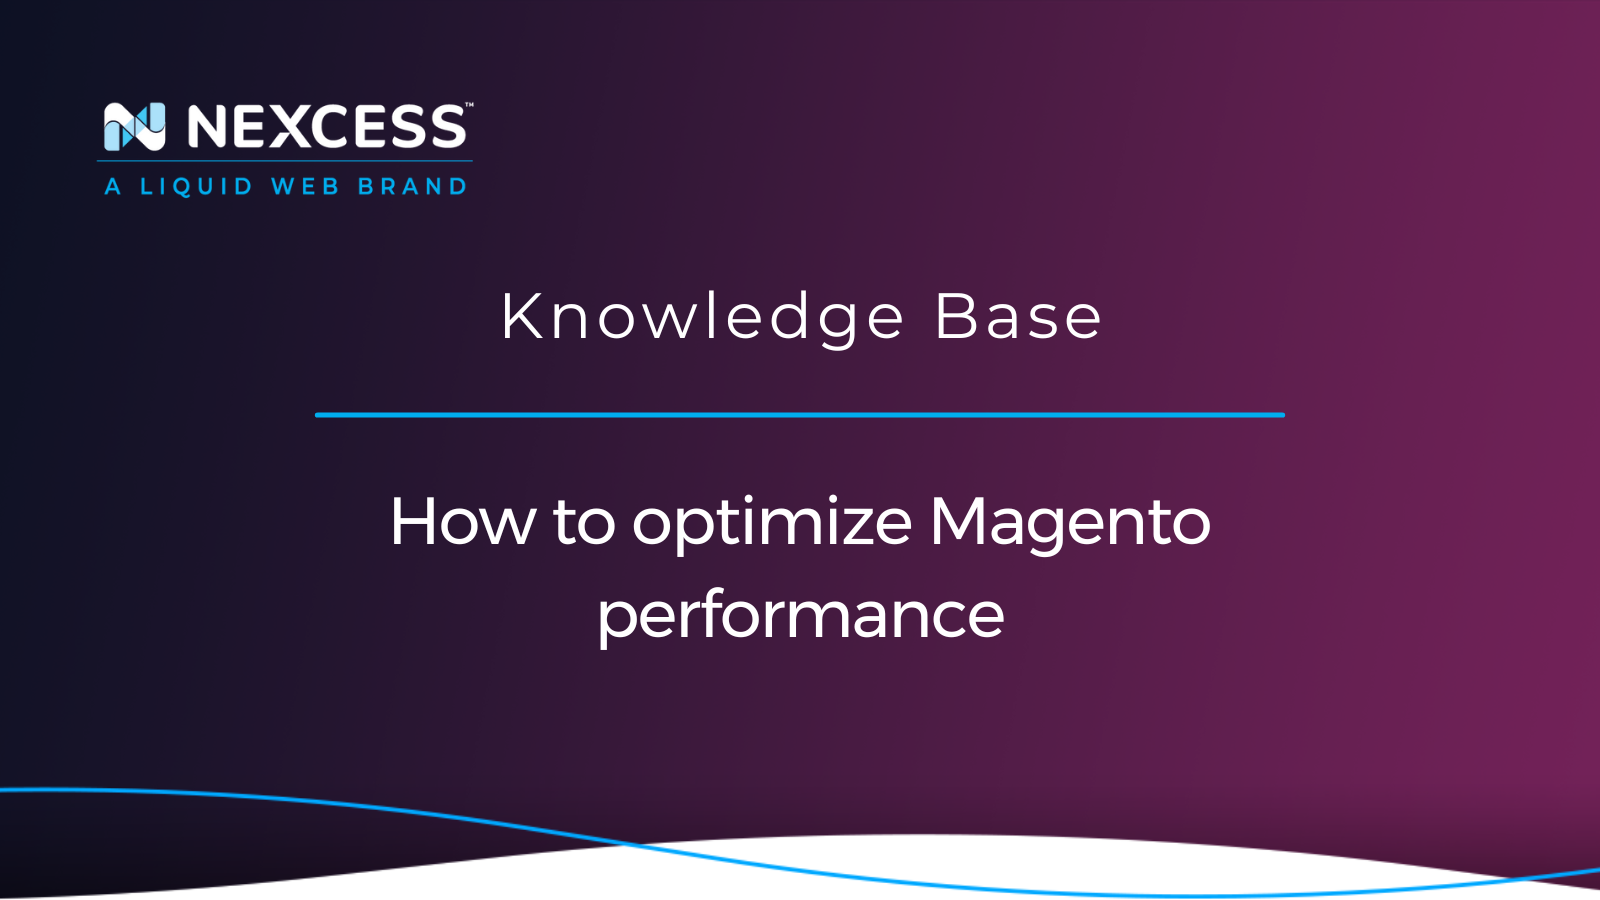 How to optimize Magento performance